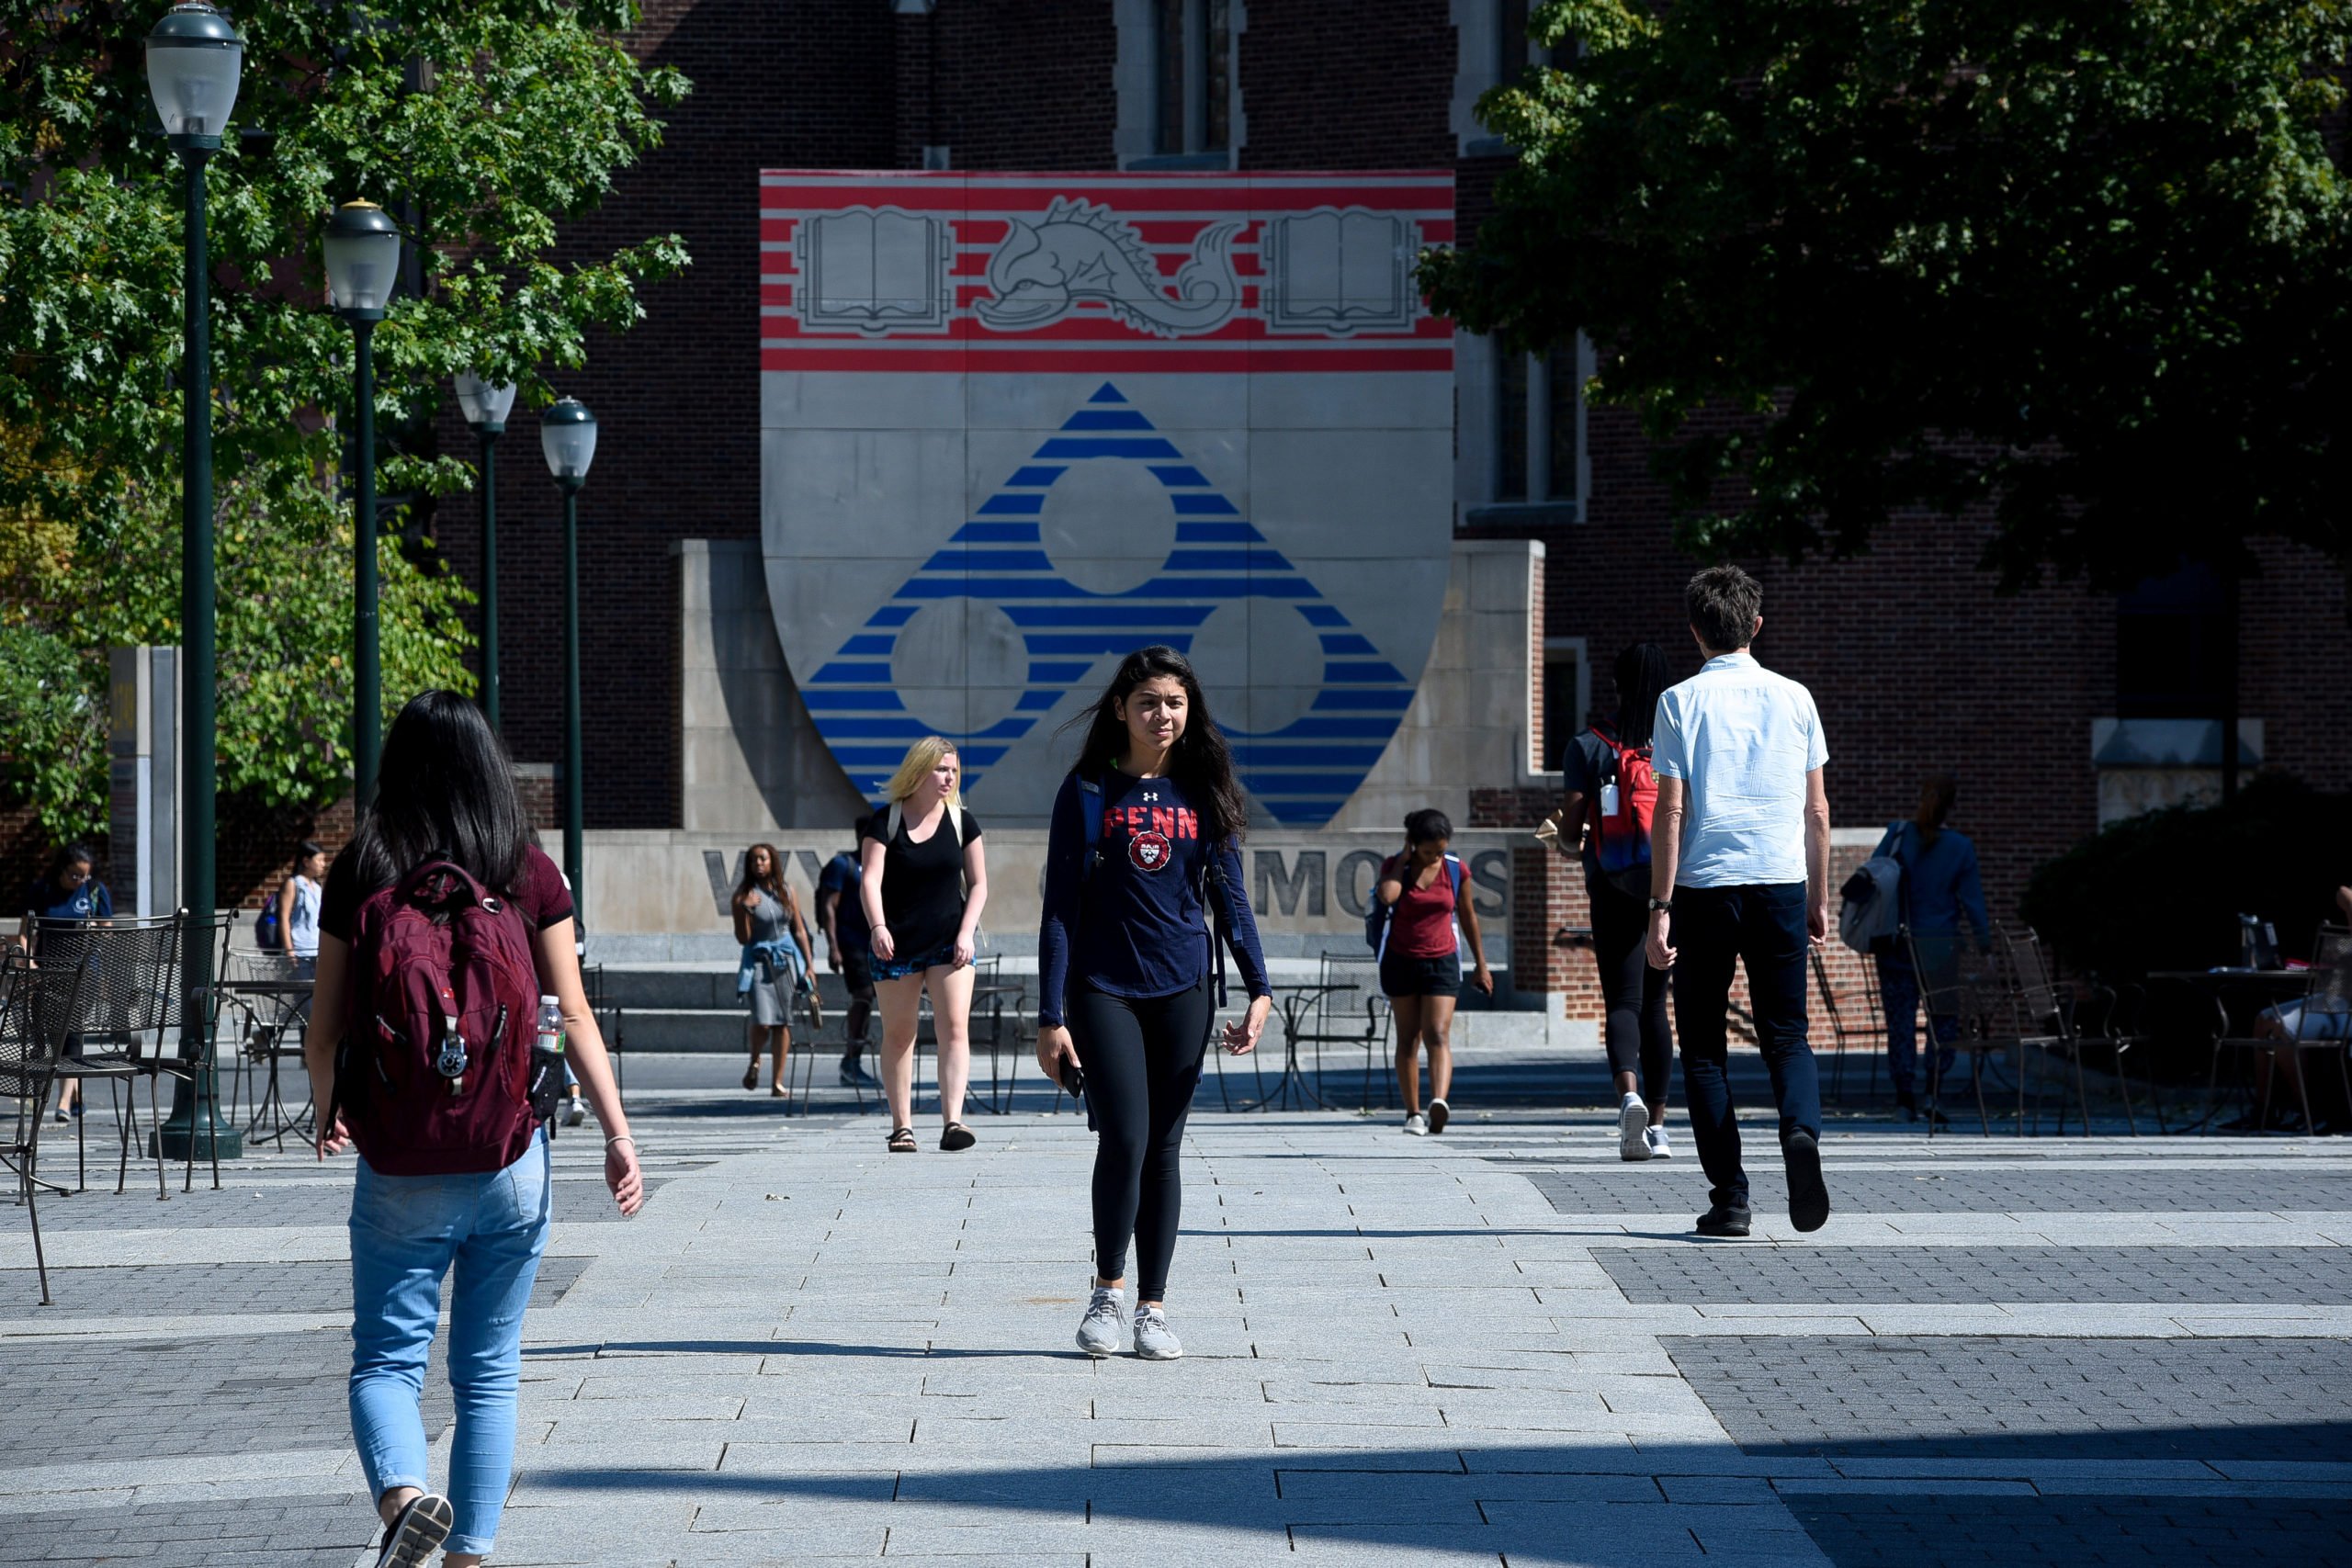 Students walk between classes in the Wynn Commons on the campus of the University of Pennsylvania in Philadelphia, Pennsylvania, U.S., September 25, 2017. REUTERS/Charles Mostoller